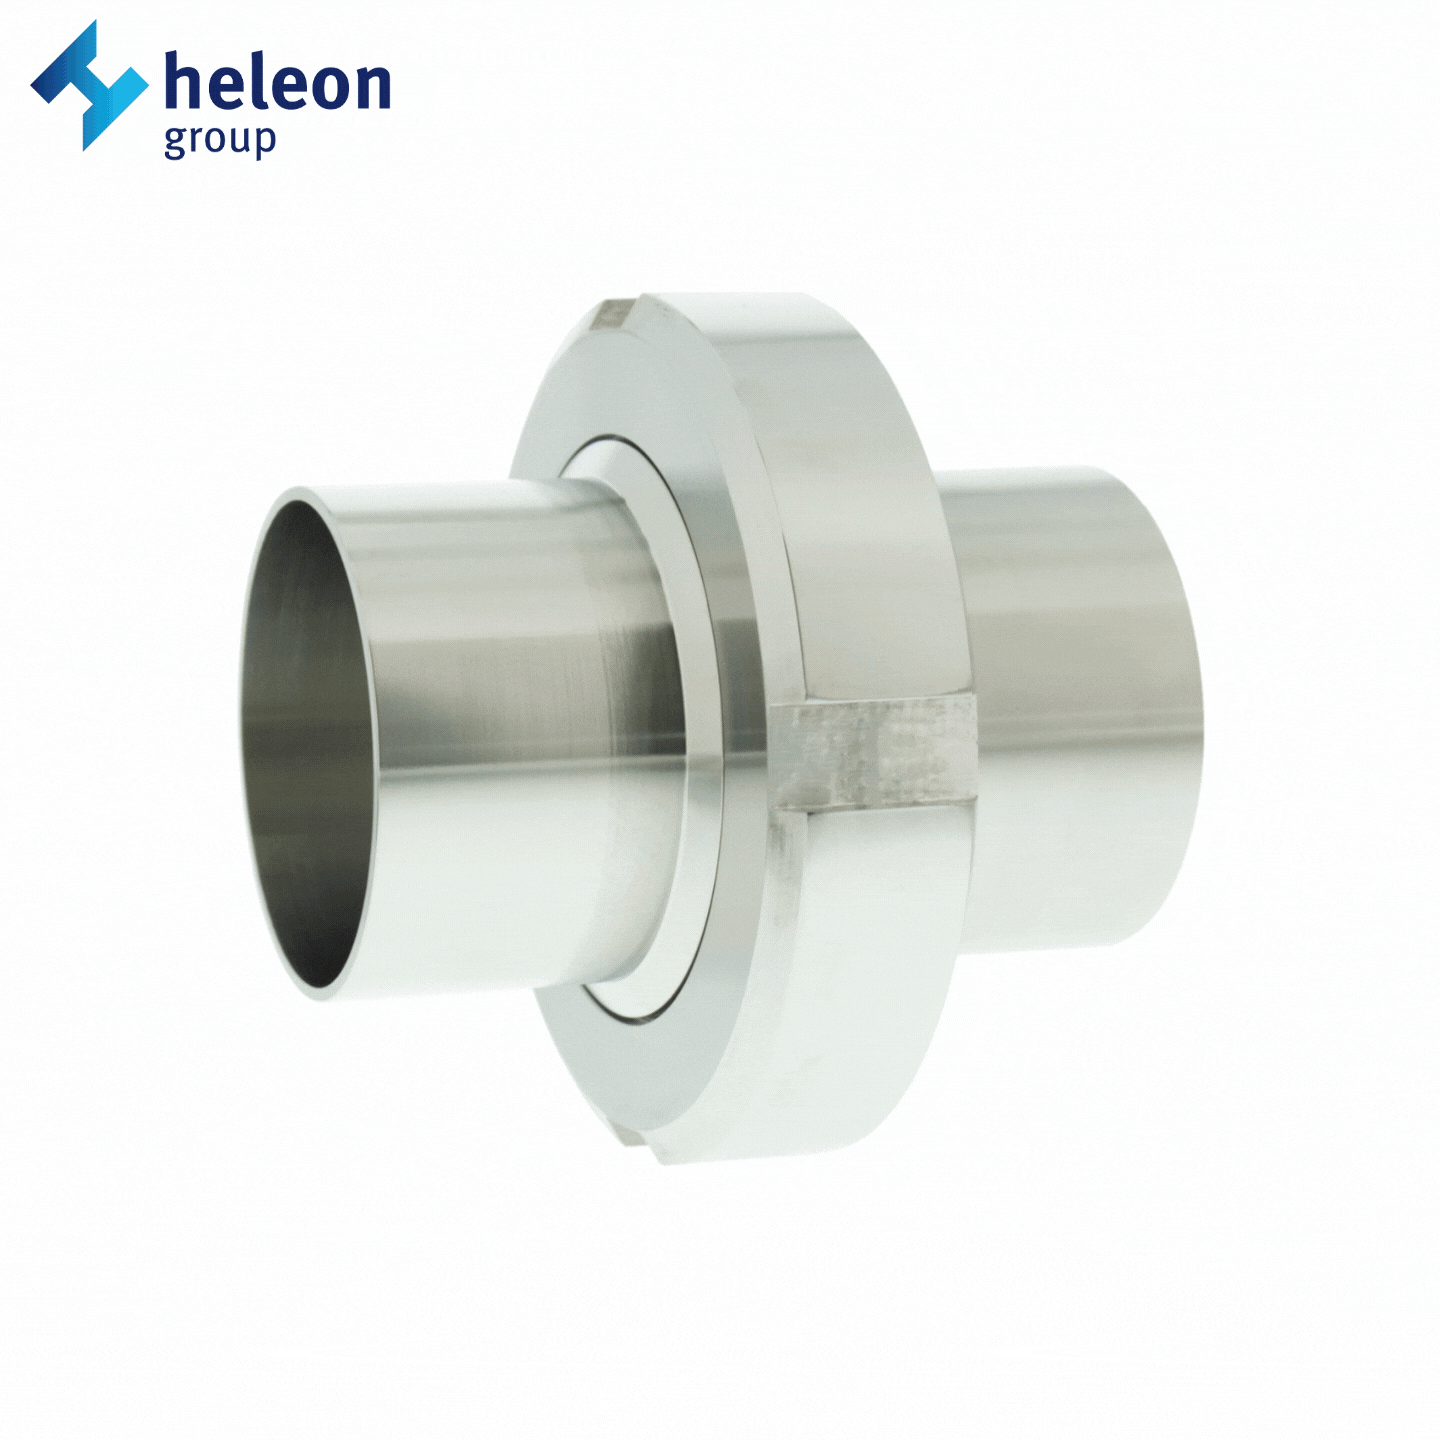 Hygienic couplings DIN 11864 and DIN 11853